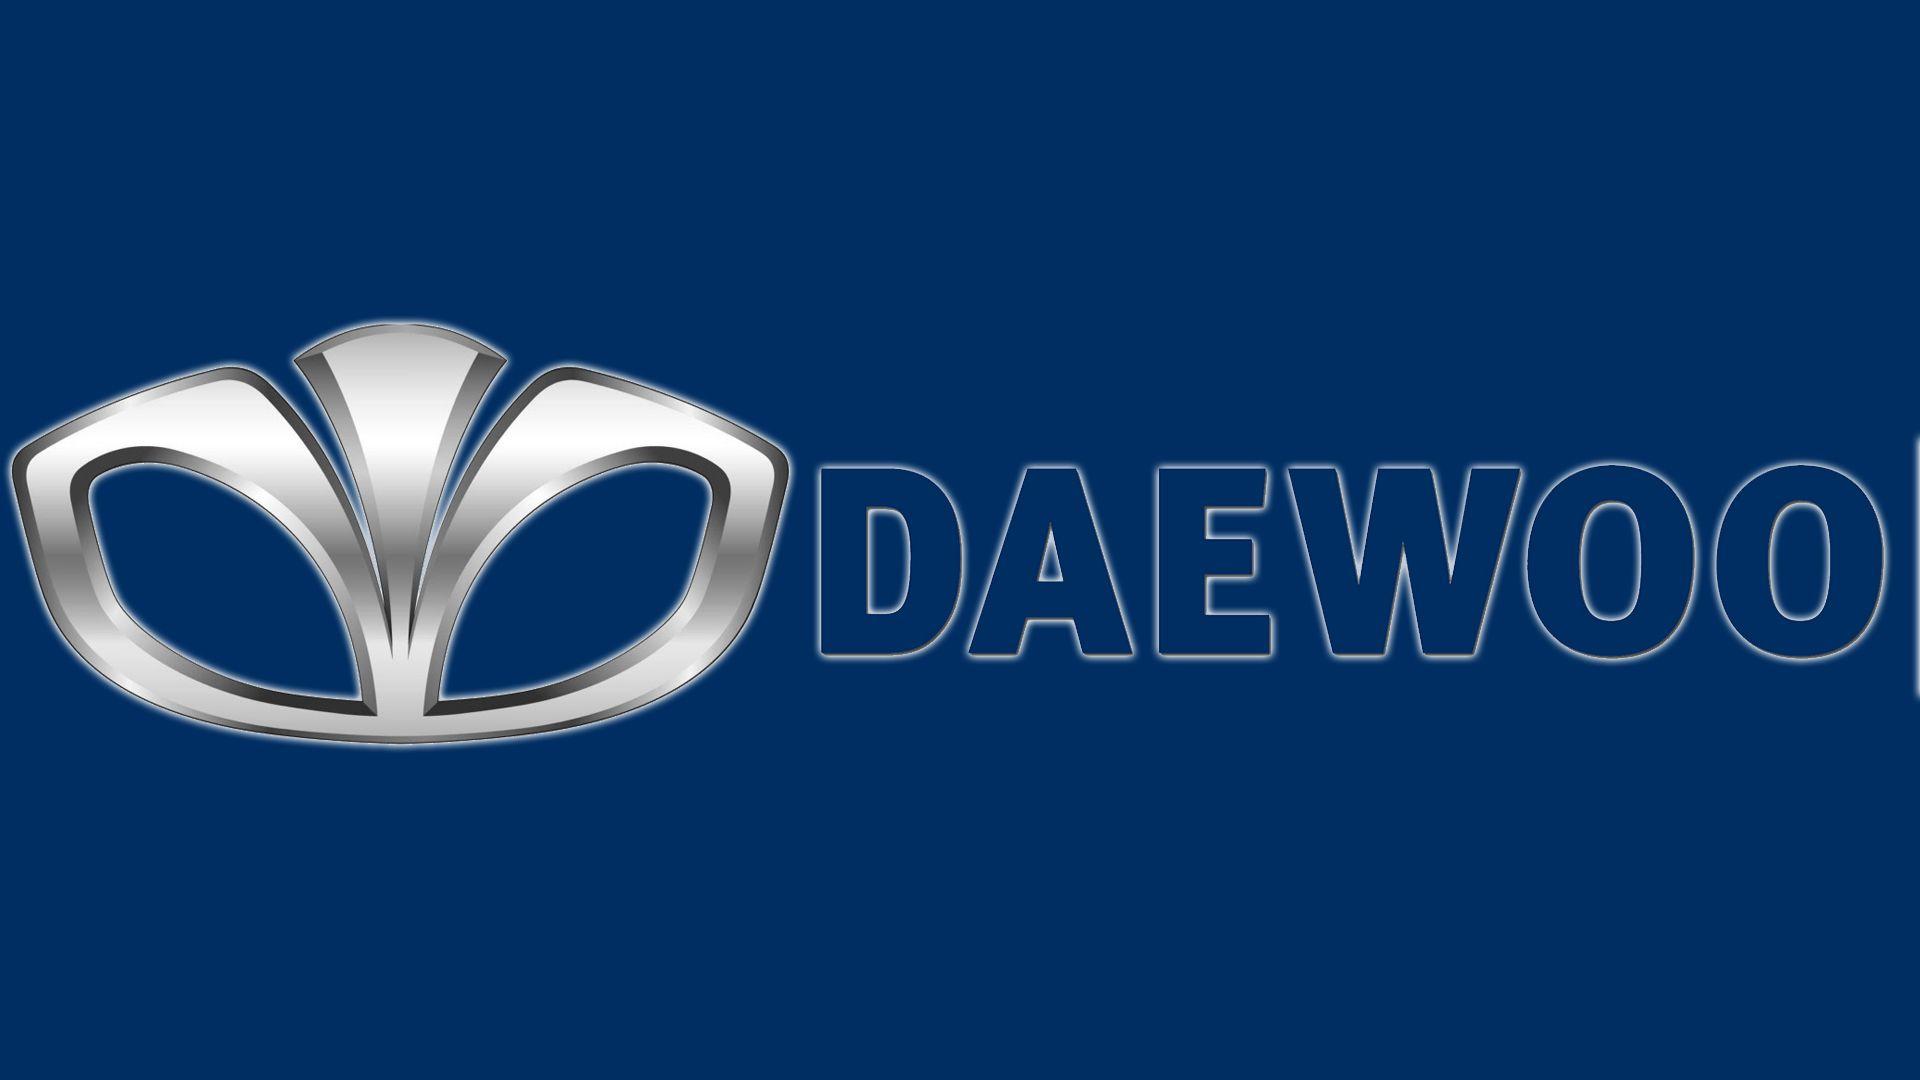 Old Daewoo Logo - Daewoo Logo Meaning and History, latest models | World Cars Brands